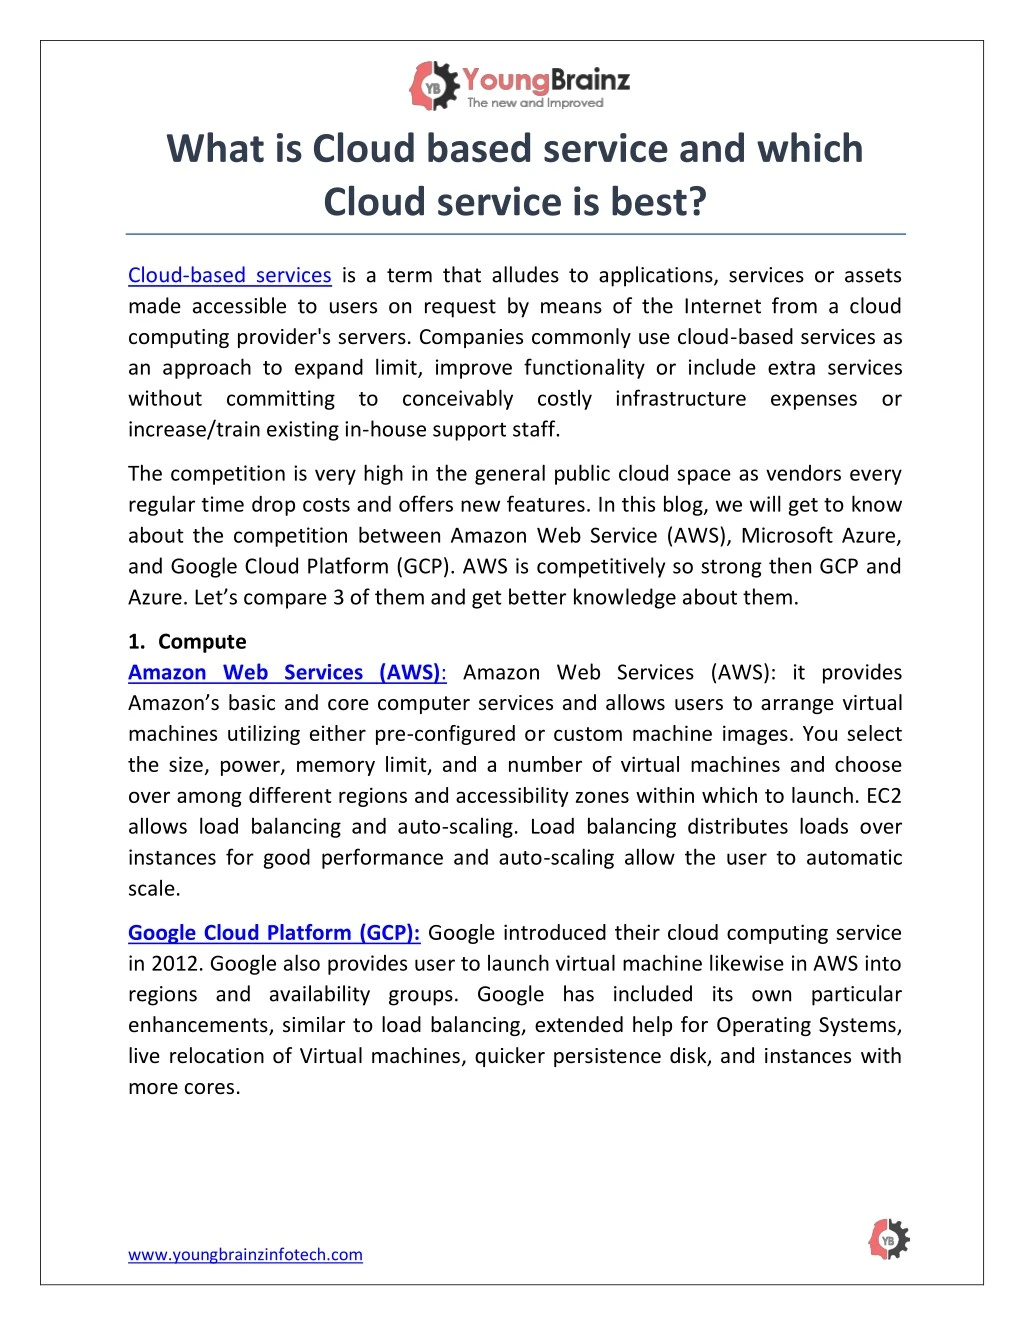 what is cloud based service and which cloud